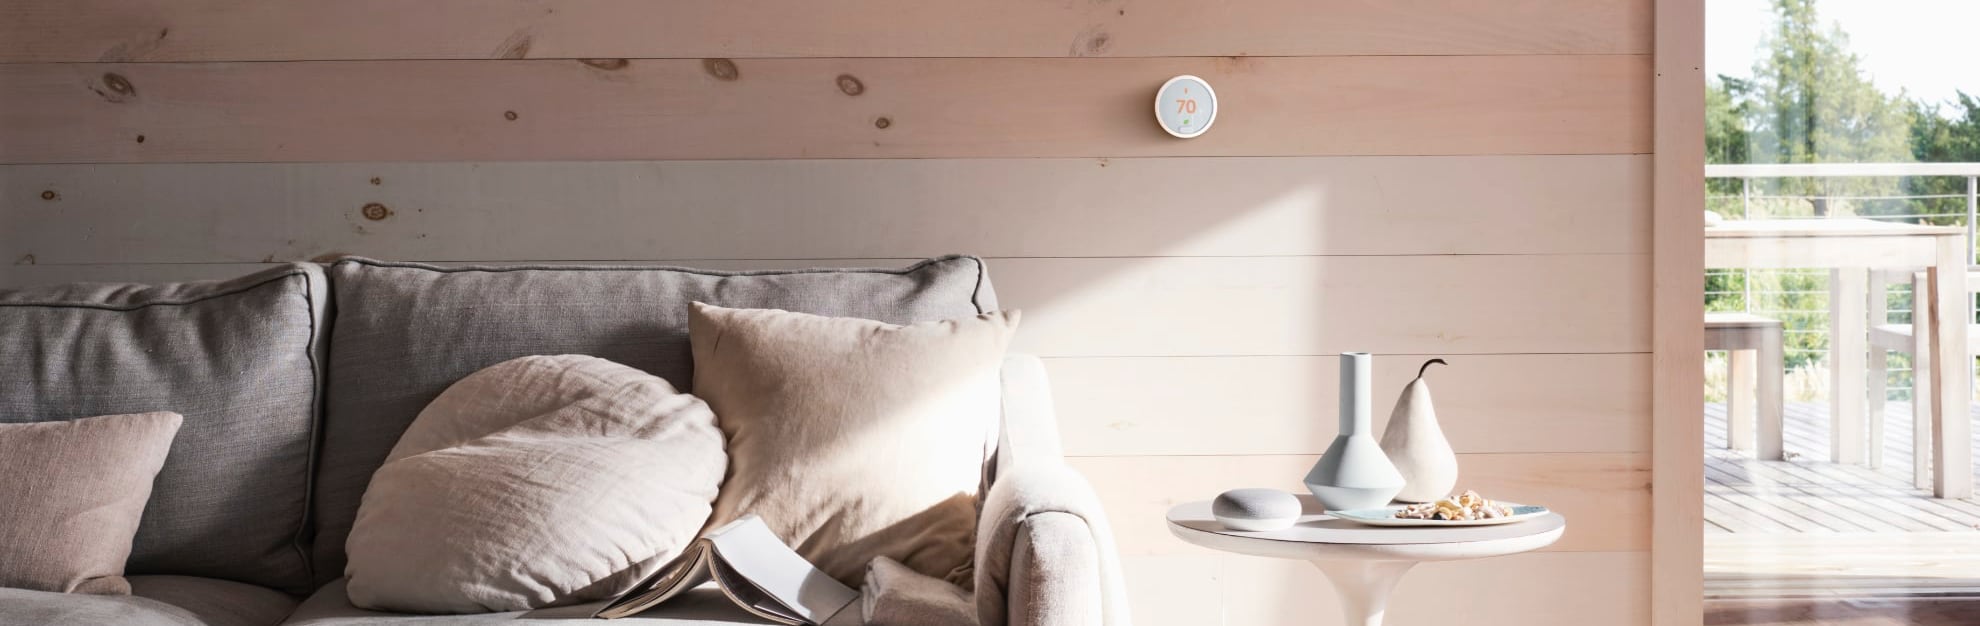 Vivint Home Automation in Tucson